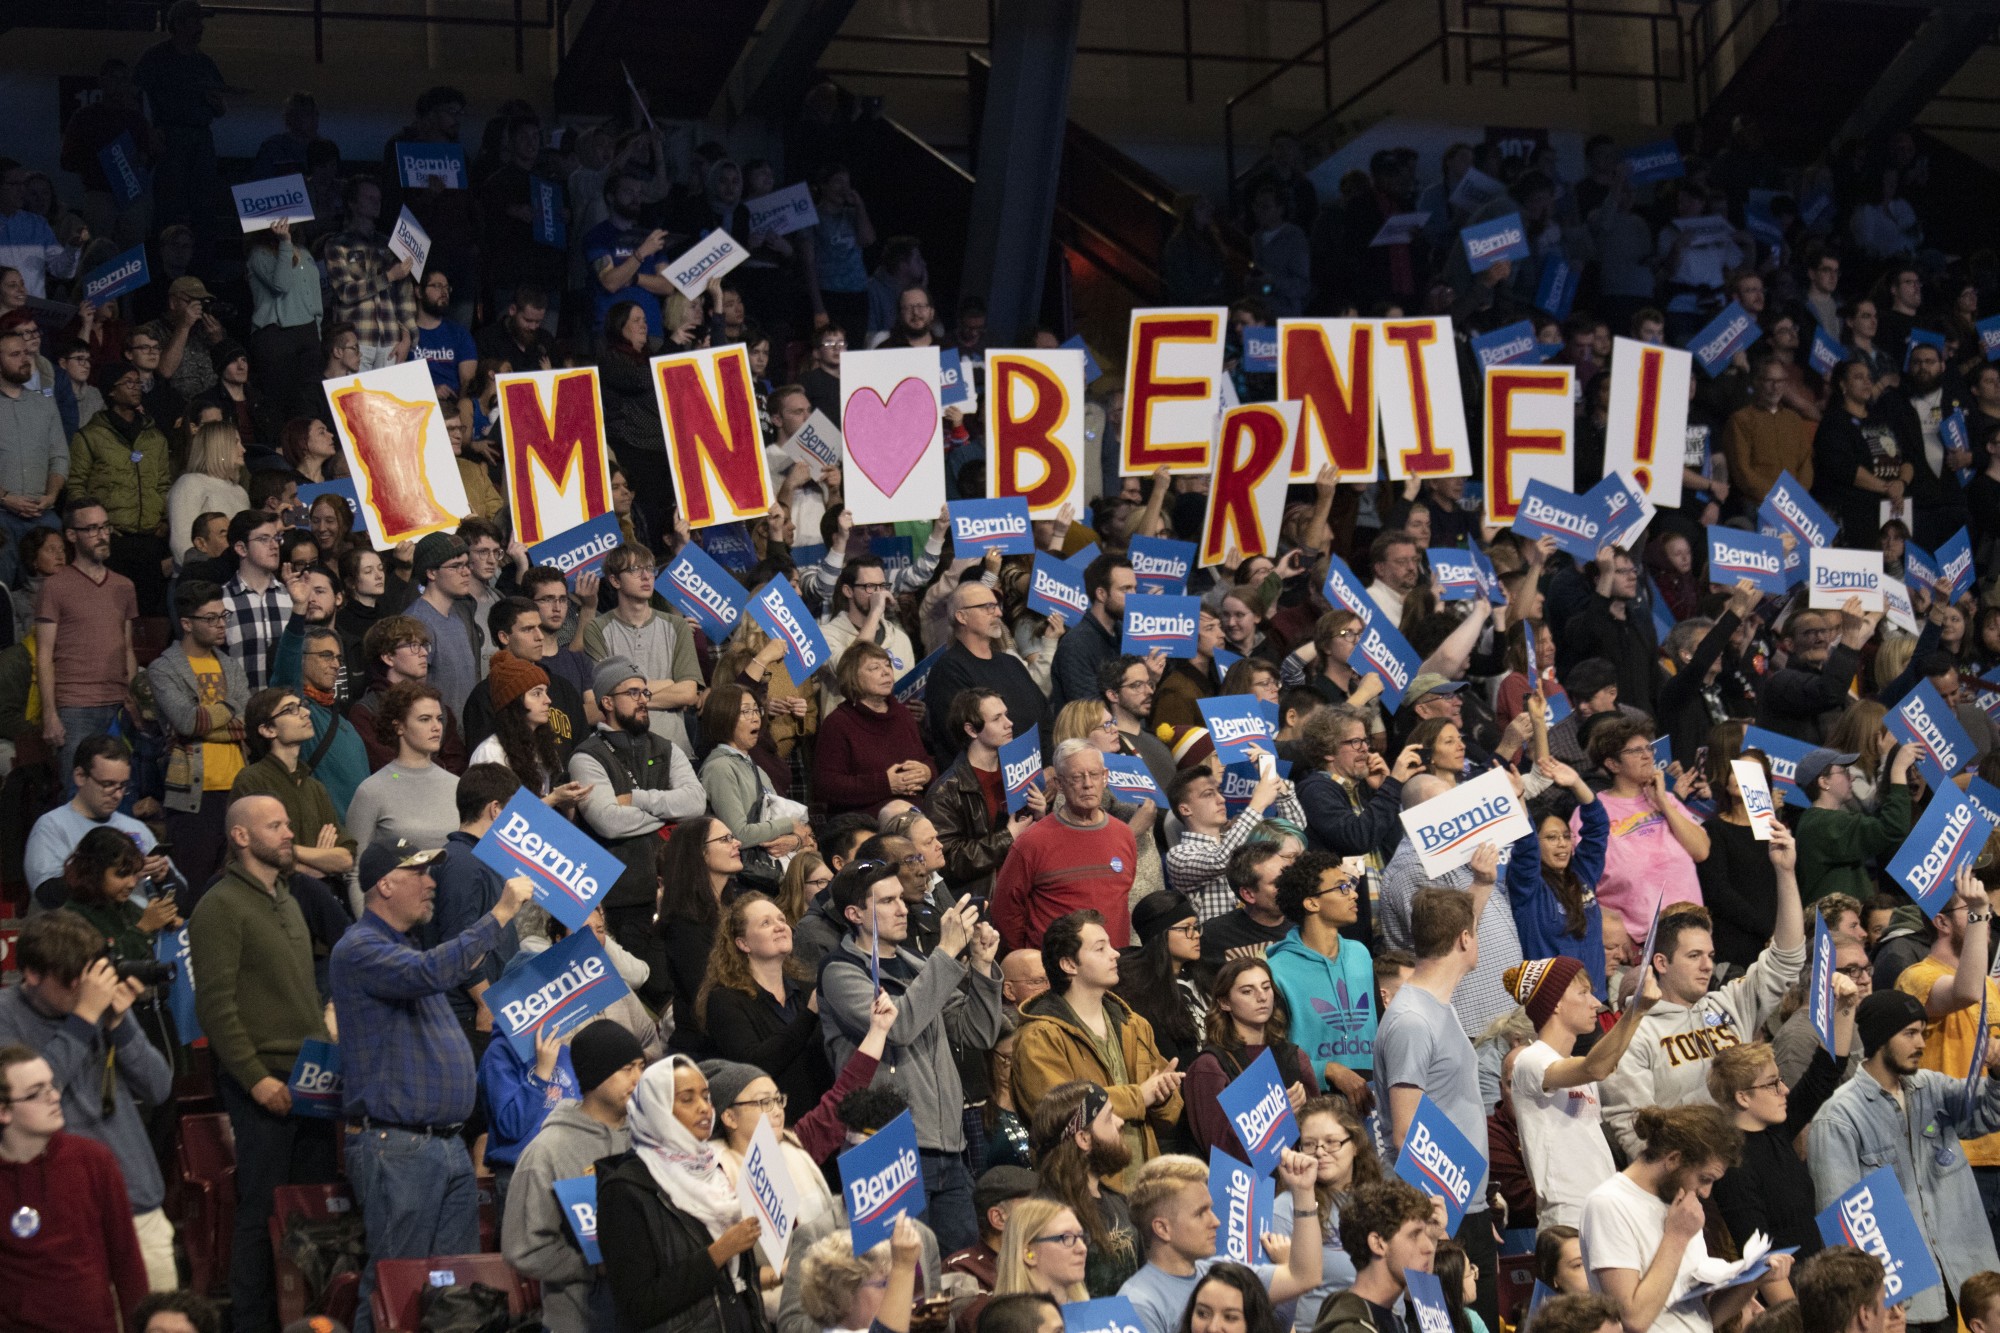 Rally attendees hold up signs supporting U.S. Senator Bernie Sanders at Williams Arena on Sunday, Nov. 3.